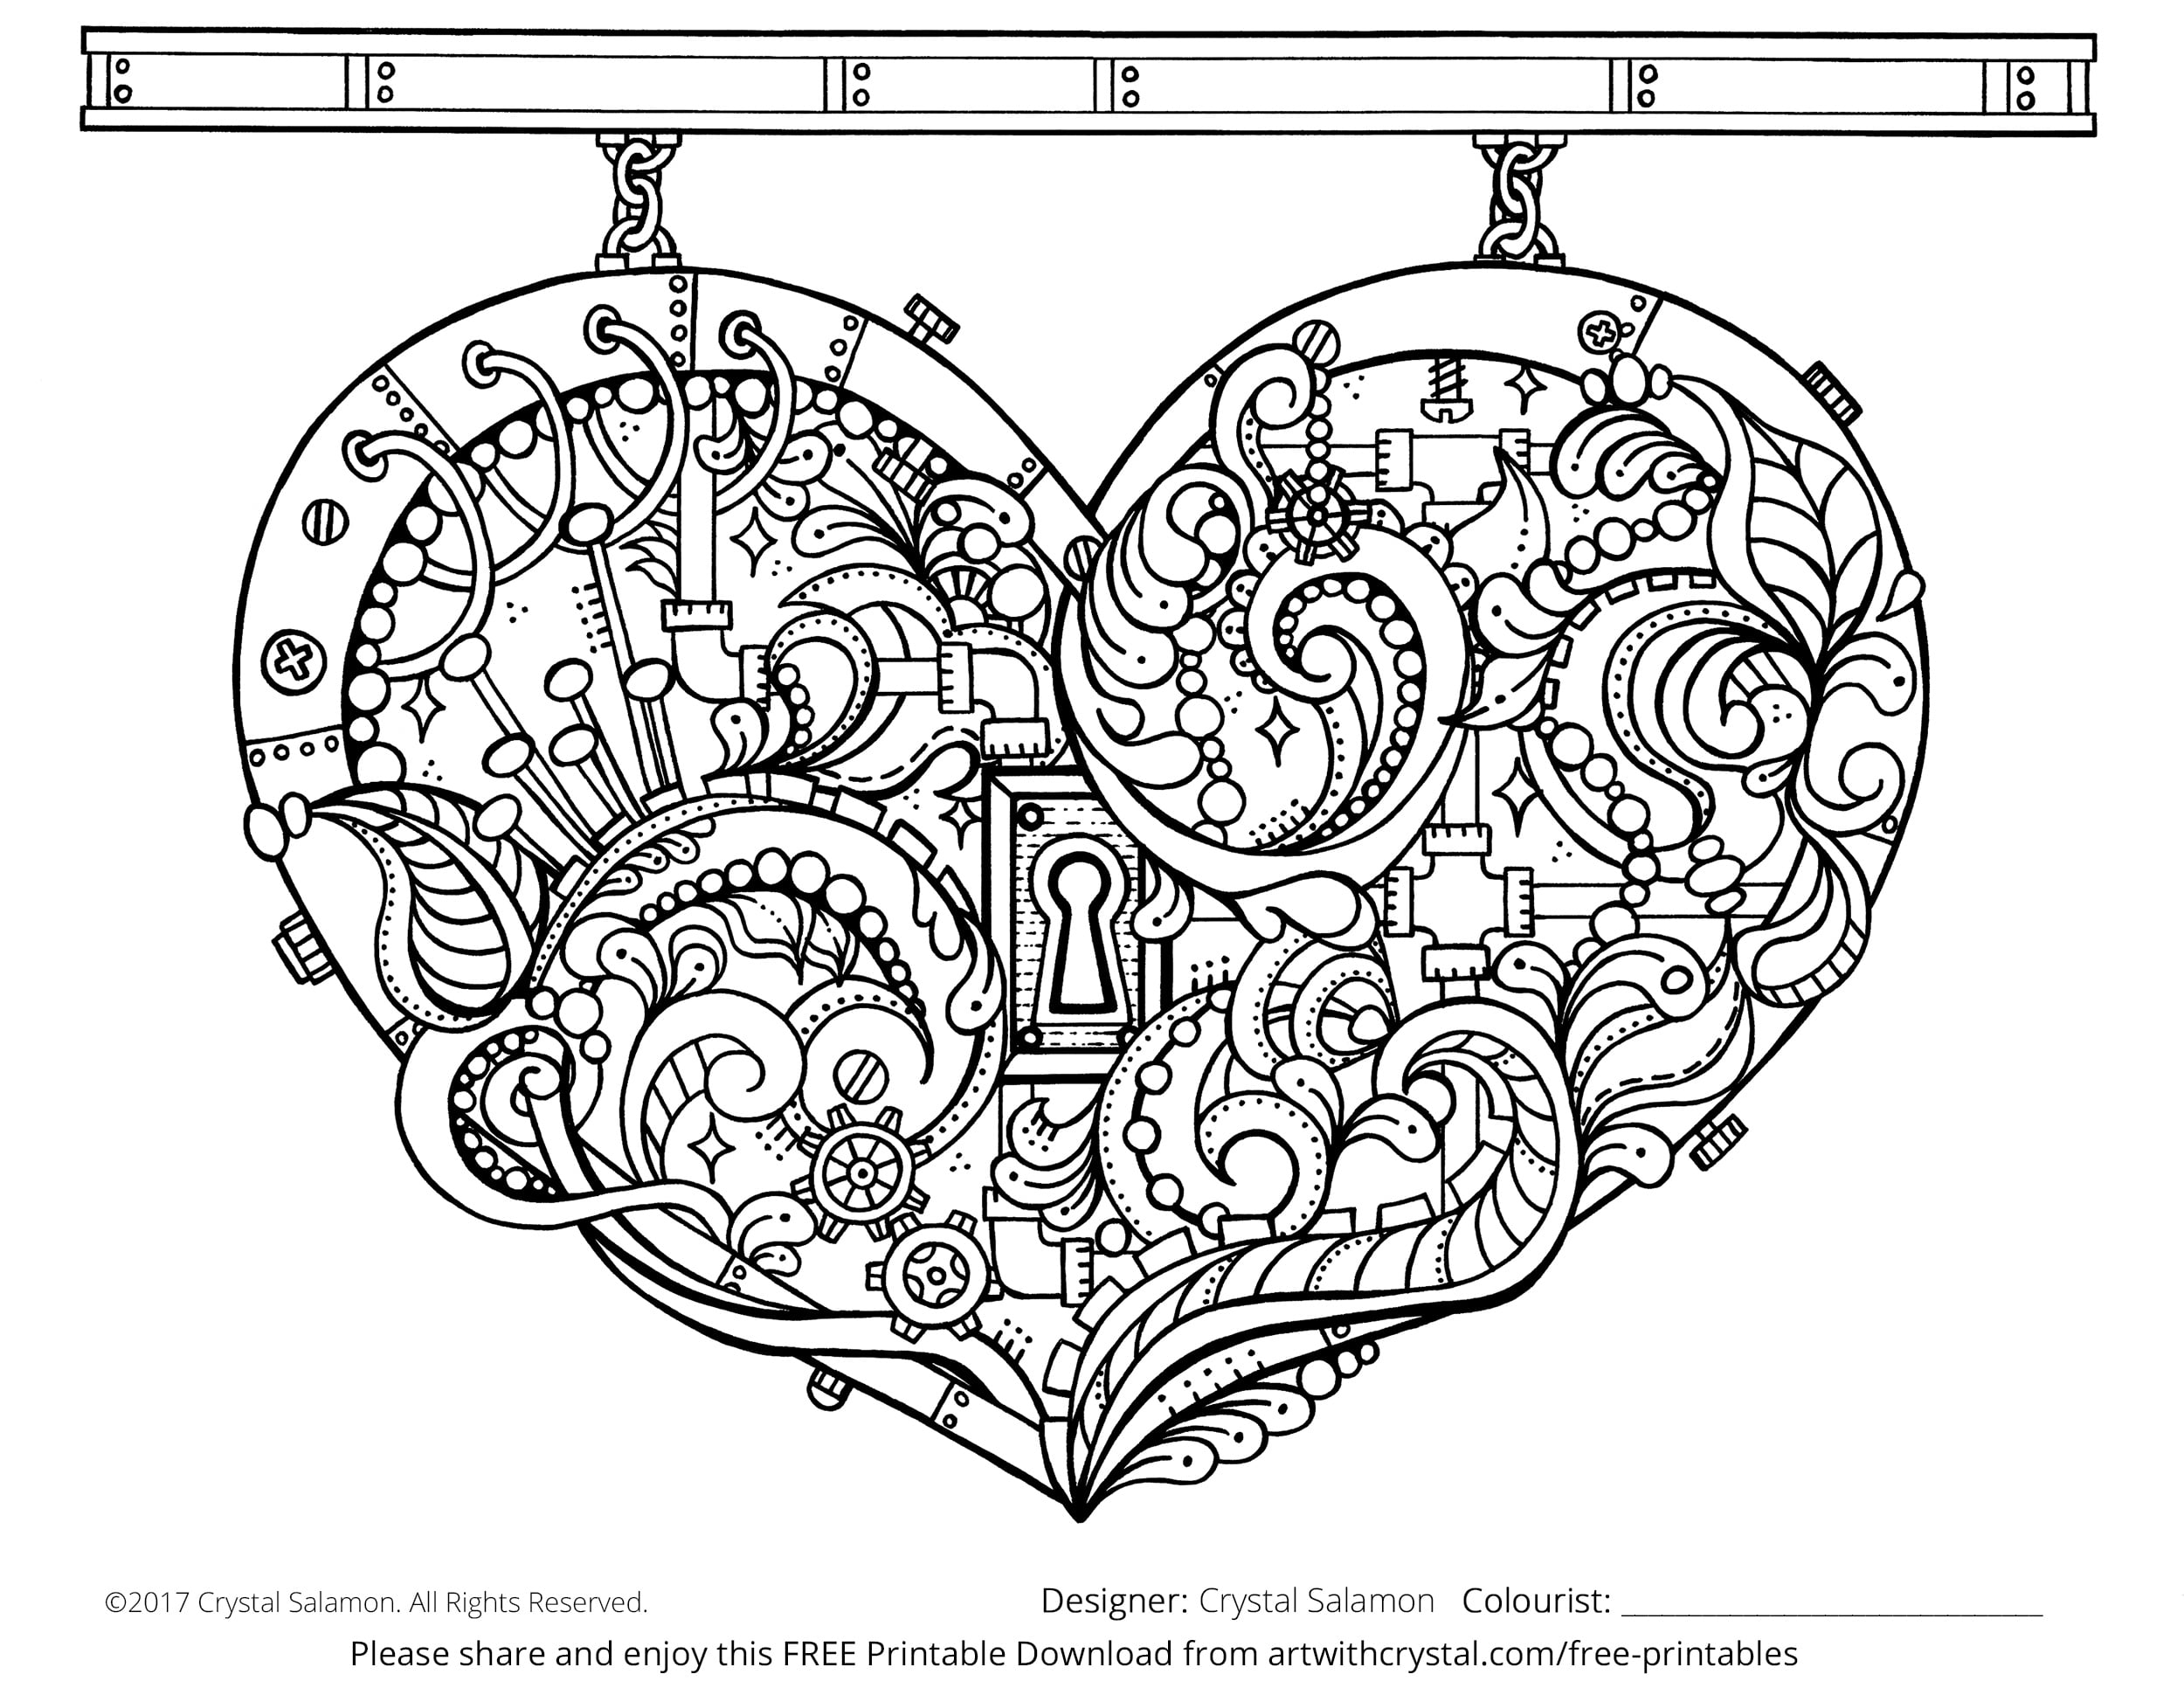 Key to my heart colouring page